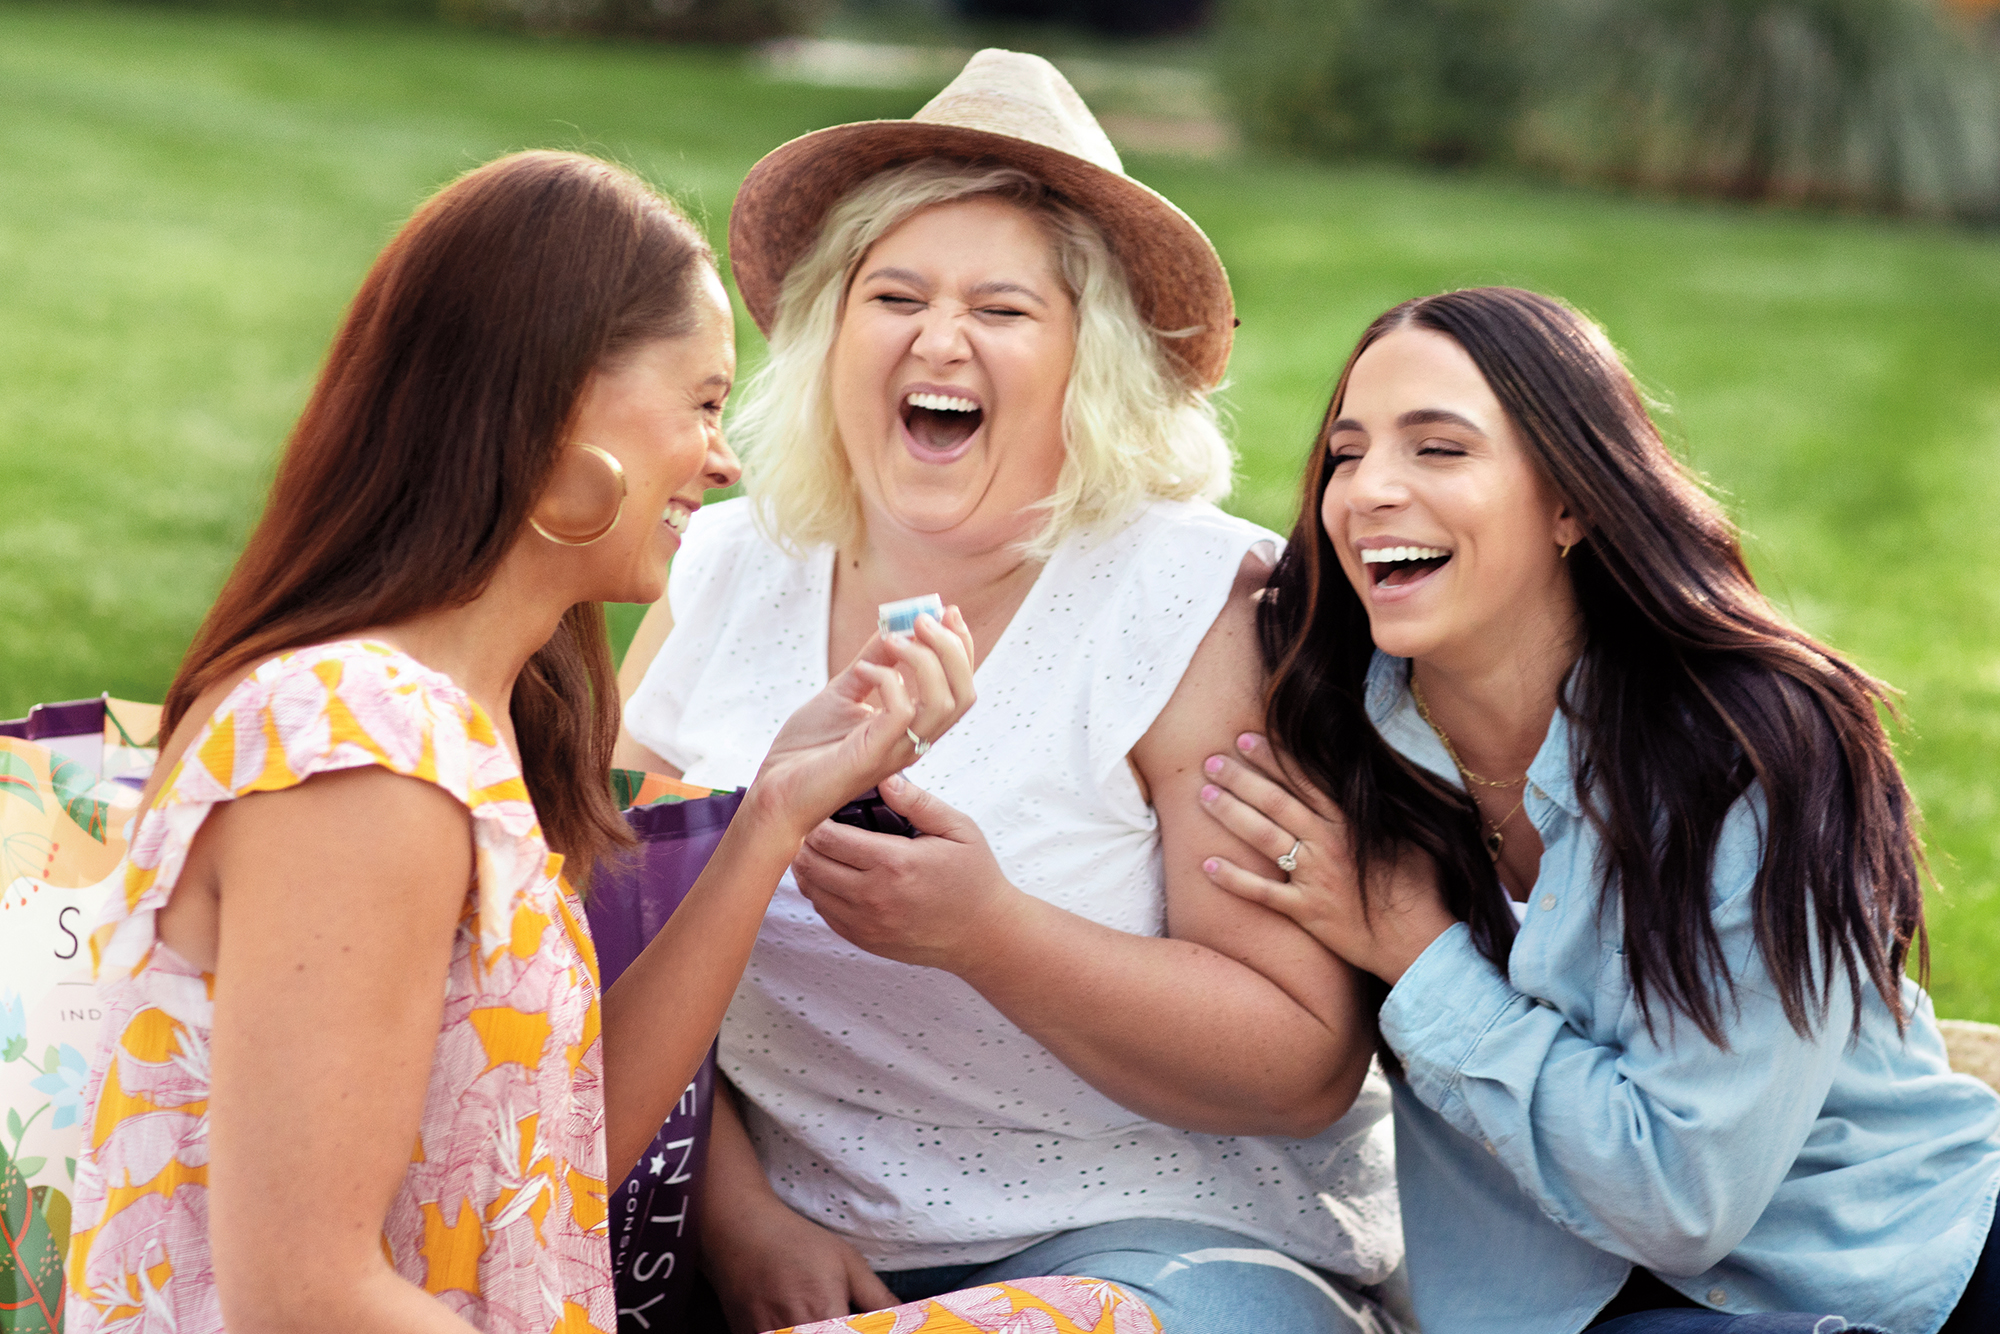 Scentsy Join Image - Three friends laughing and testing Scentsy products